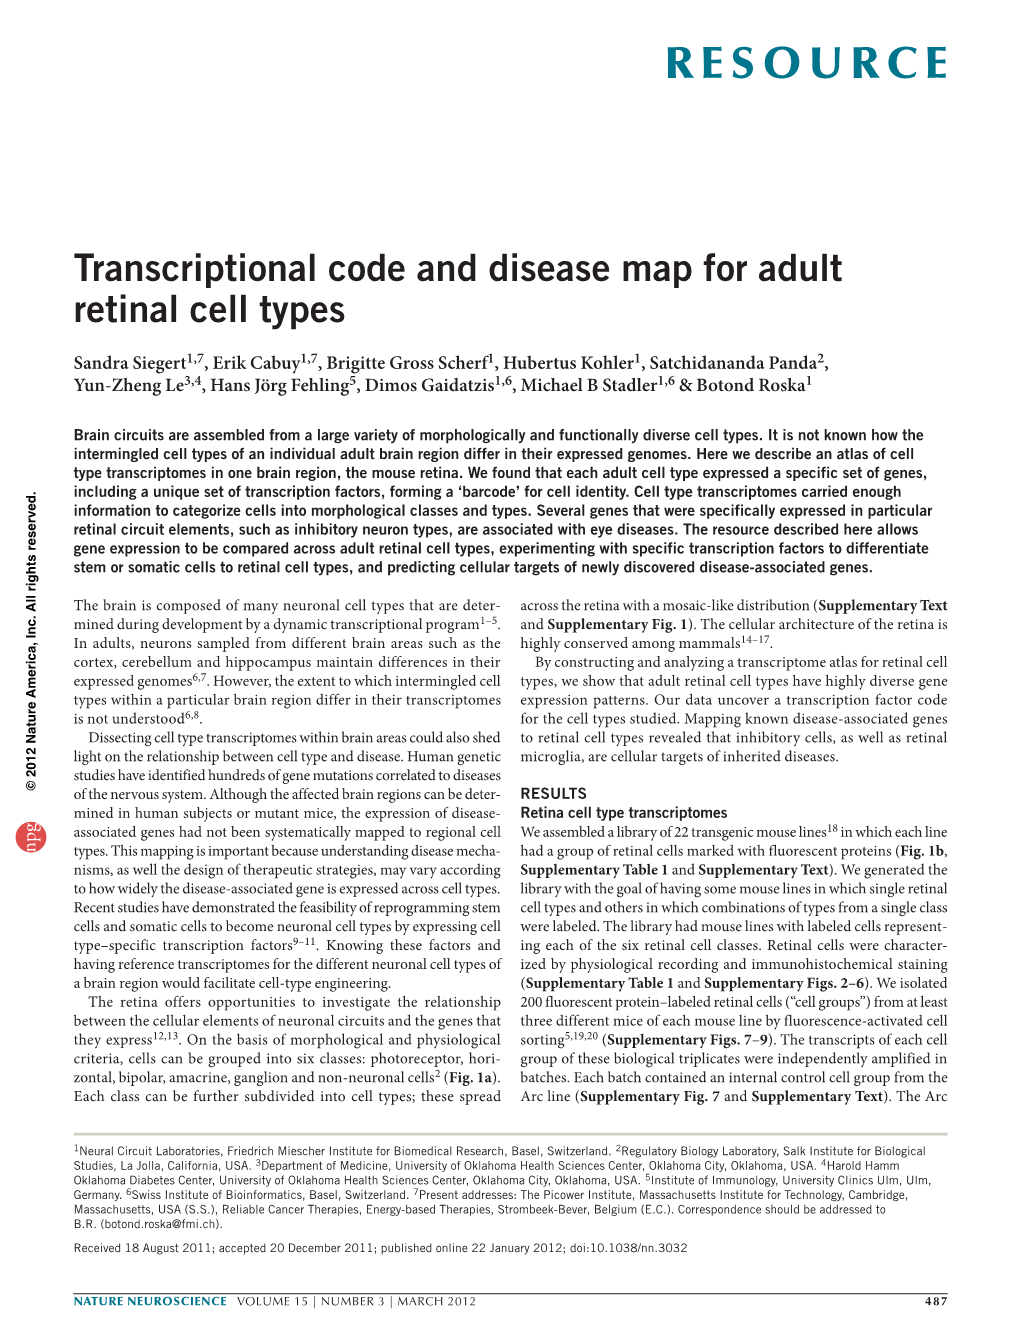 Transcriptional Code and Disease Map for Adult Retinal Cell Types